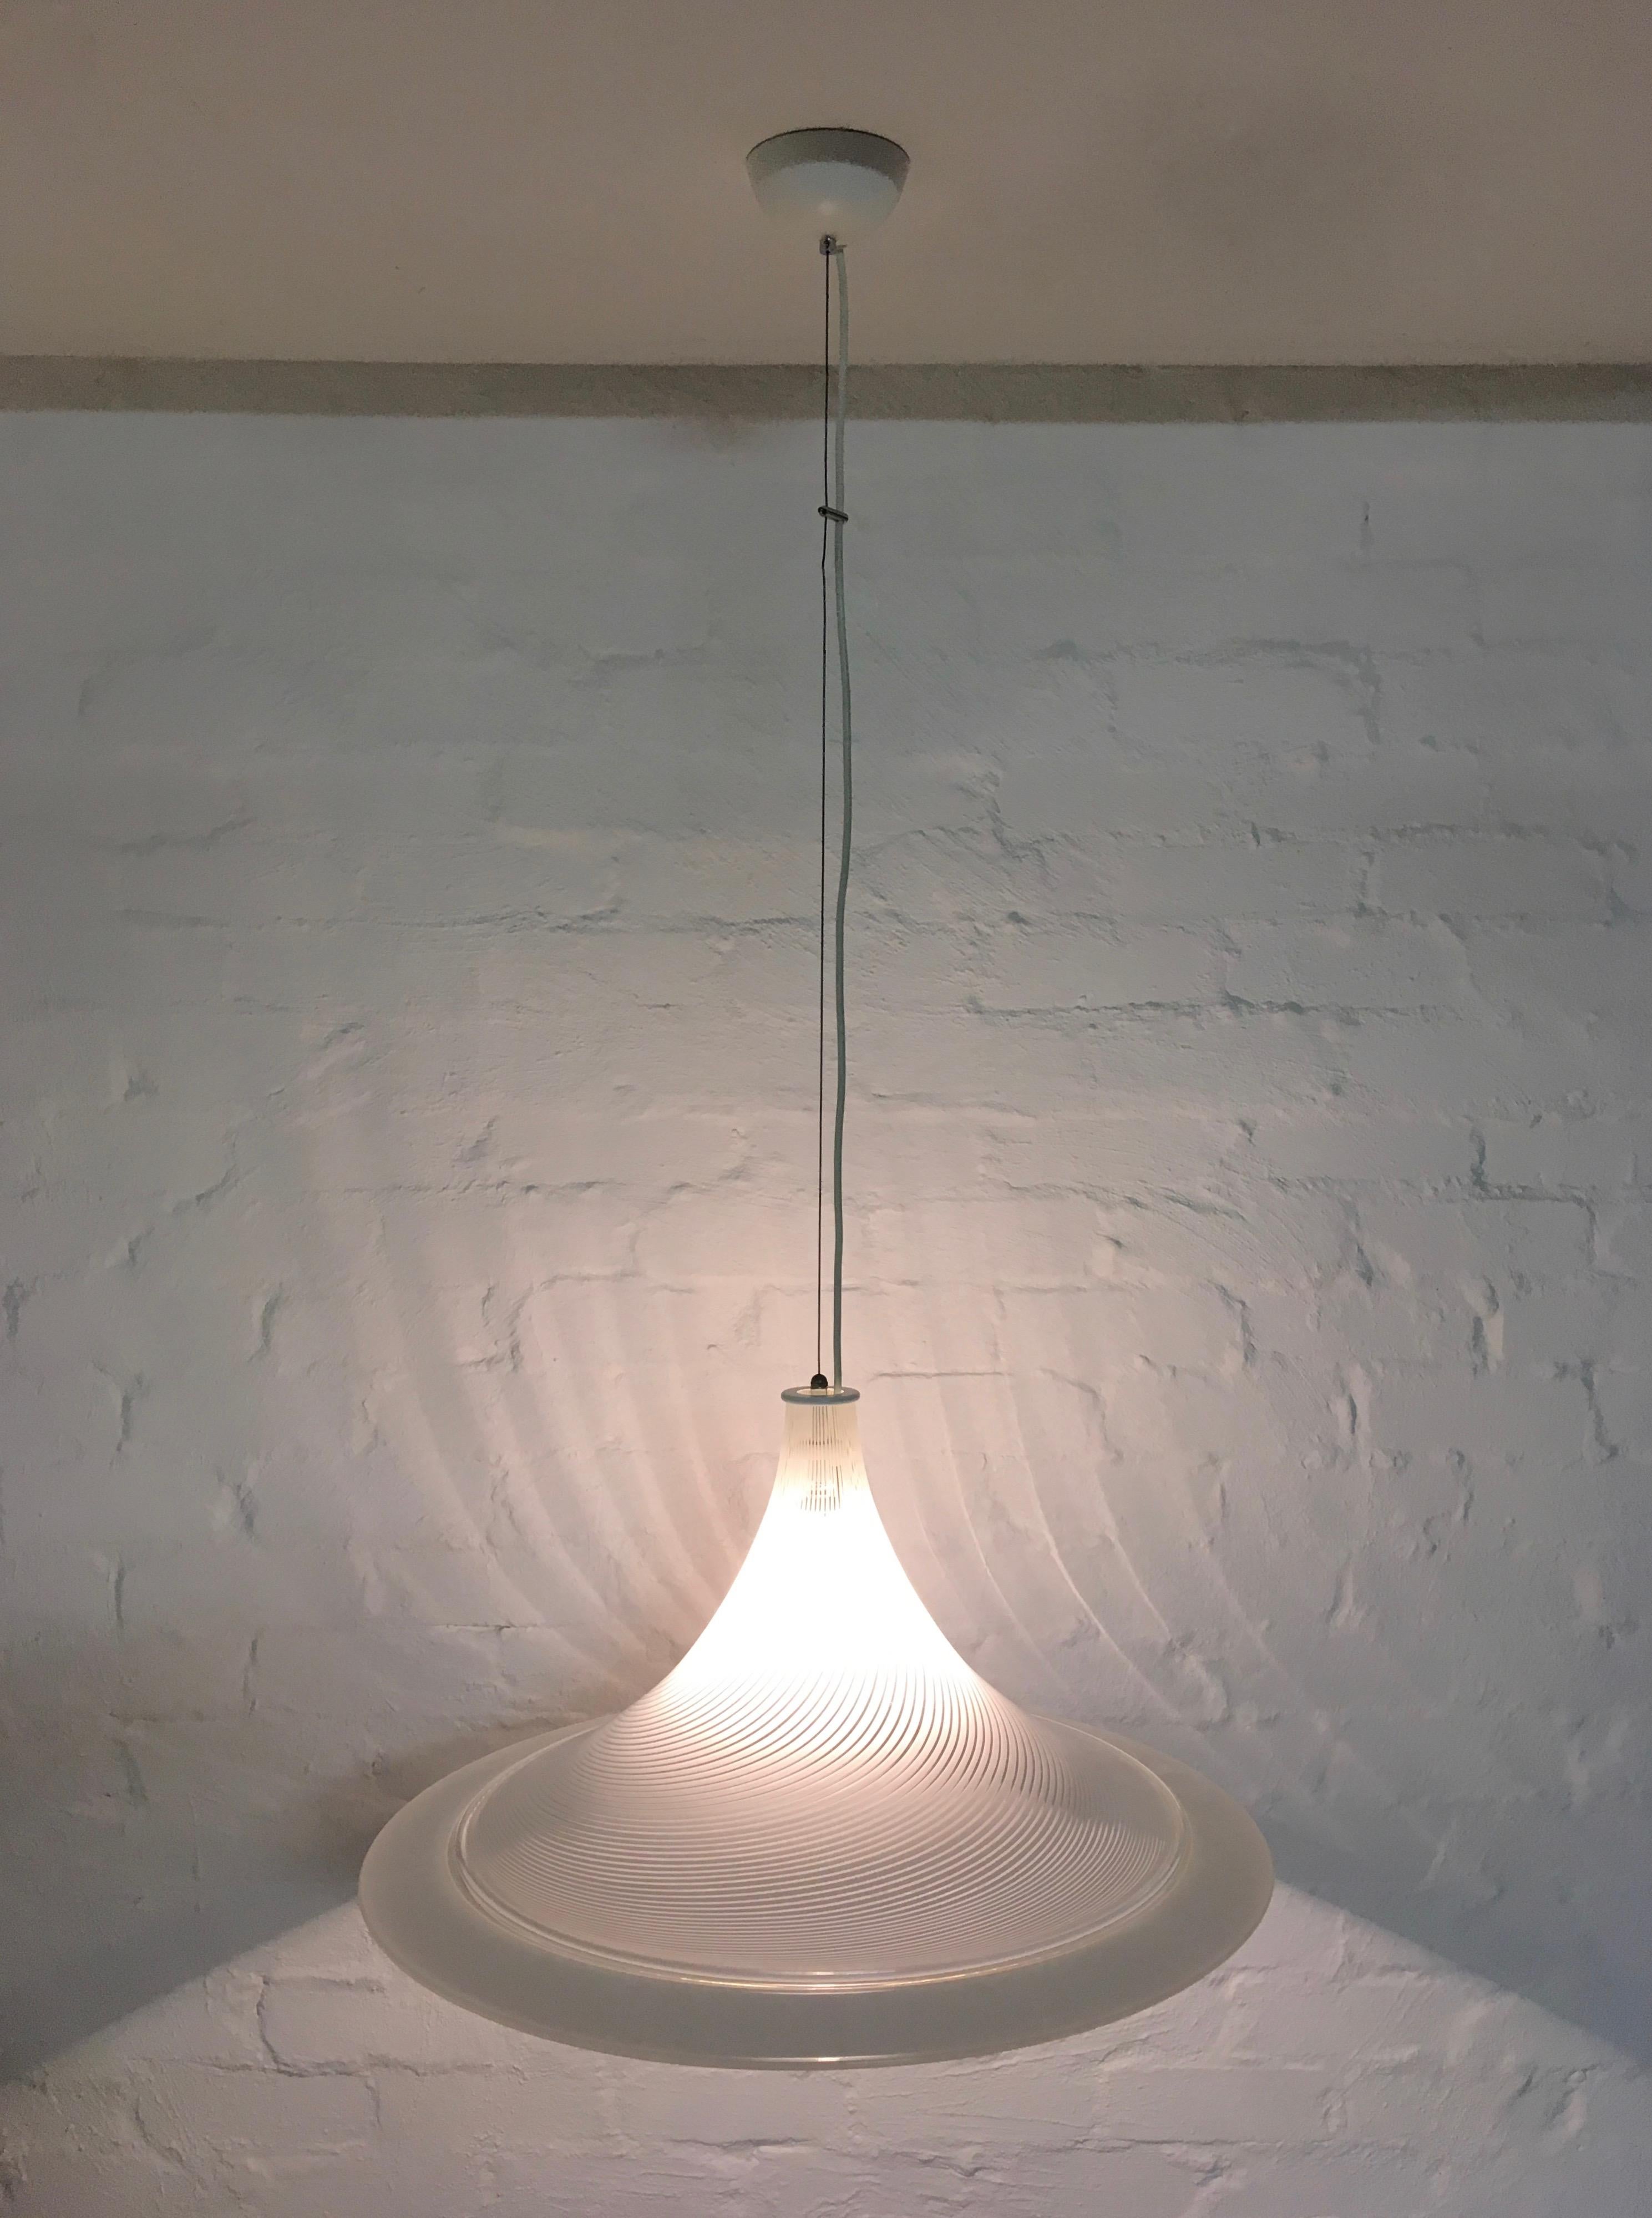 A substantial white Murano 'Tessuto' glass 1970s pendant fitting, probably by Leucos. Venini is another possible producer. 

Stunningly simple and elegant. A wonderful shape, with a lovely broad white glass edge, makes this one of the most graceful